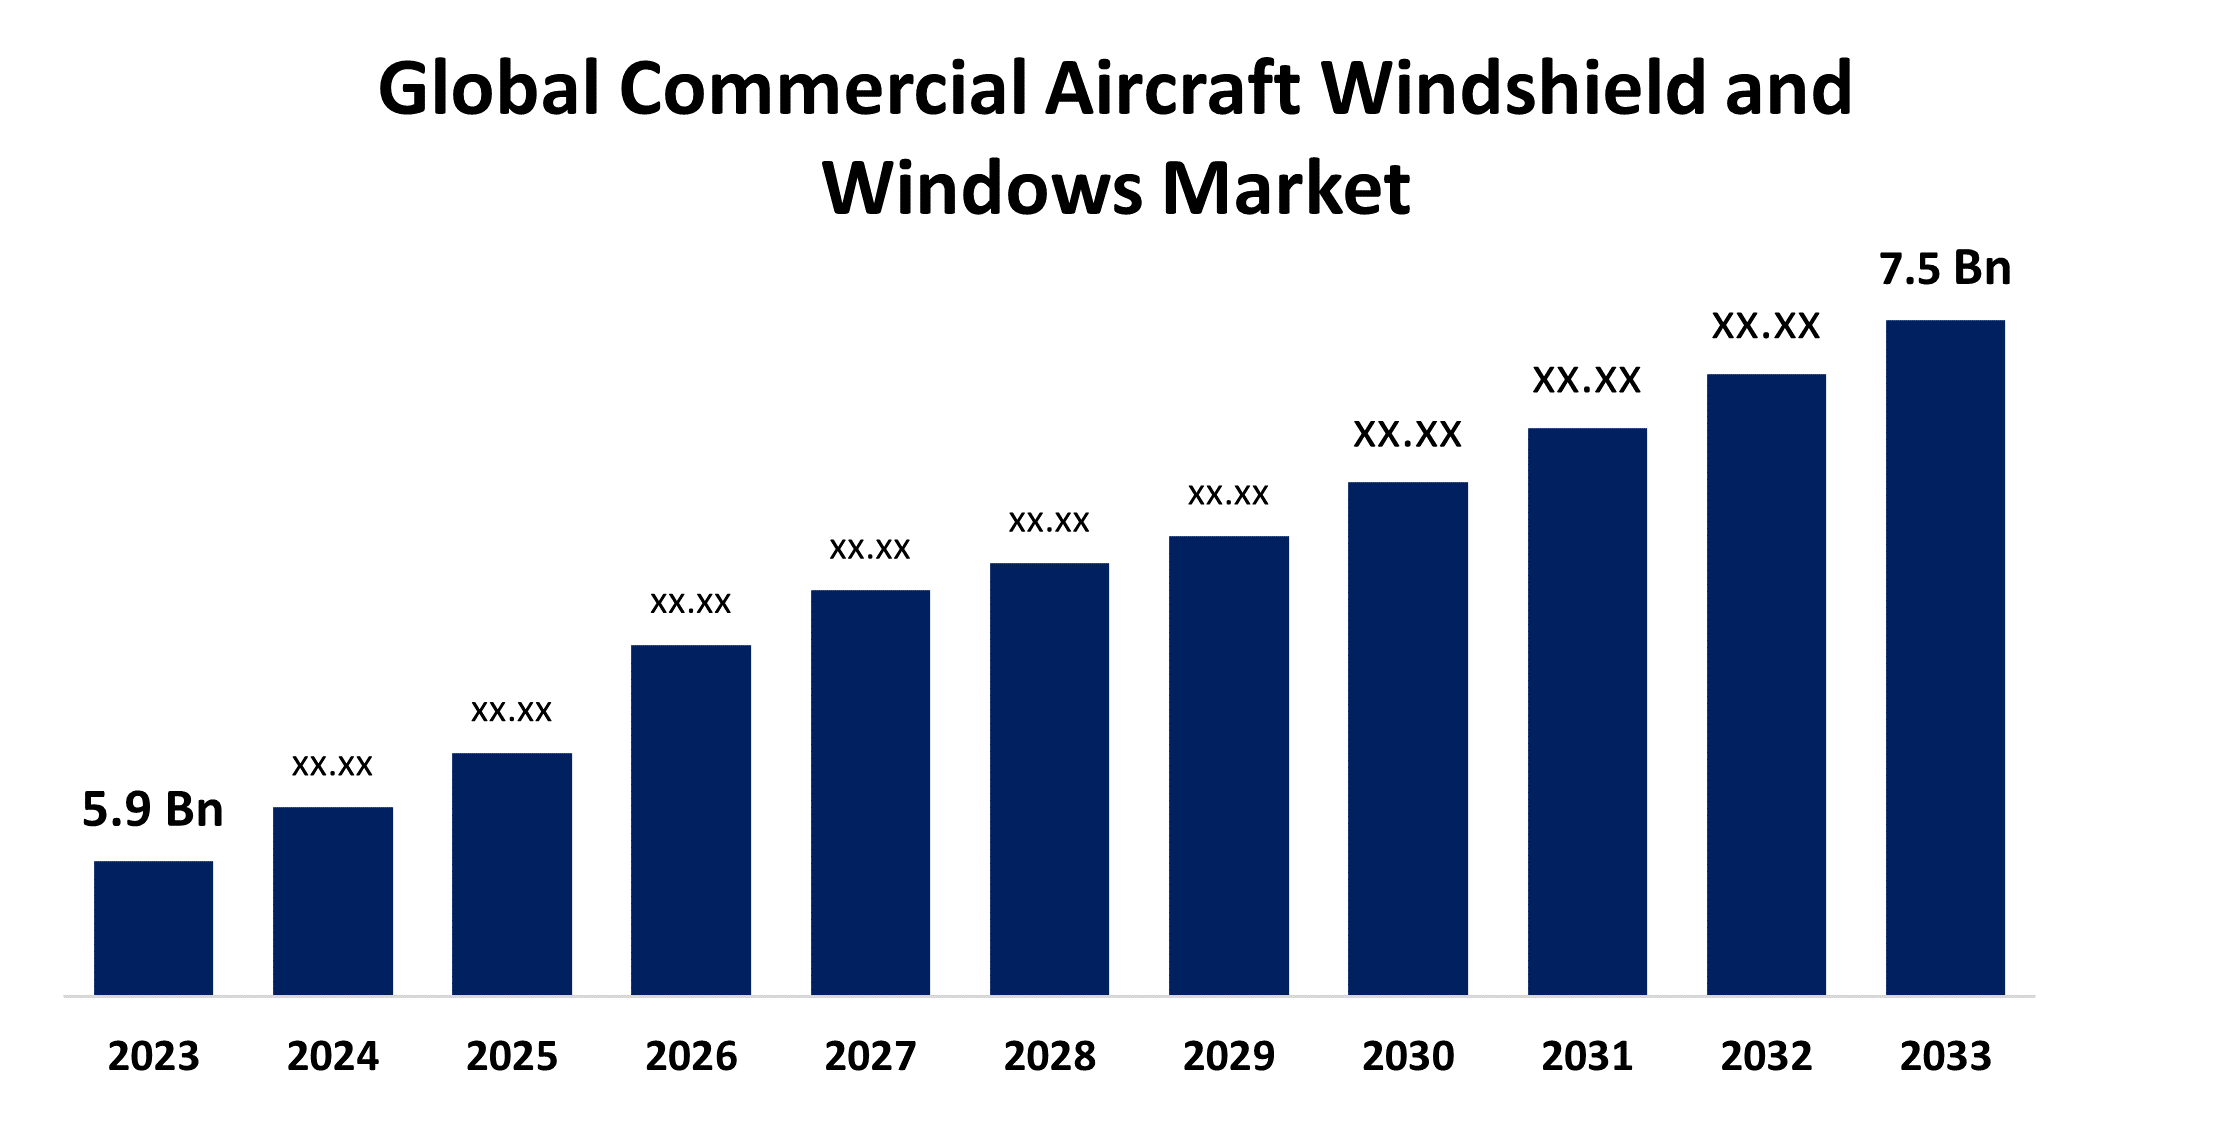 Global Commercial Aircraft Windshield and Windows Market 